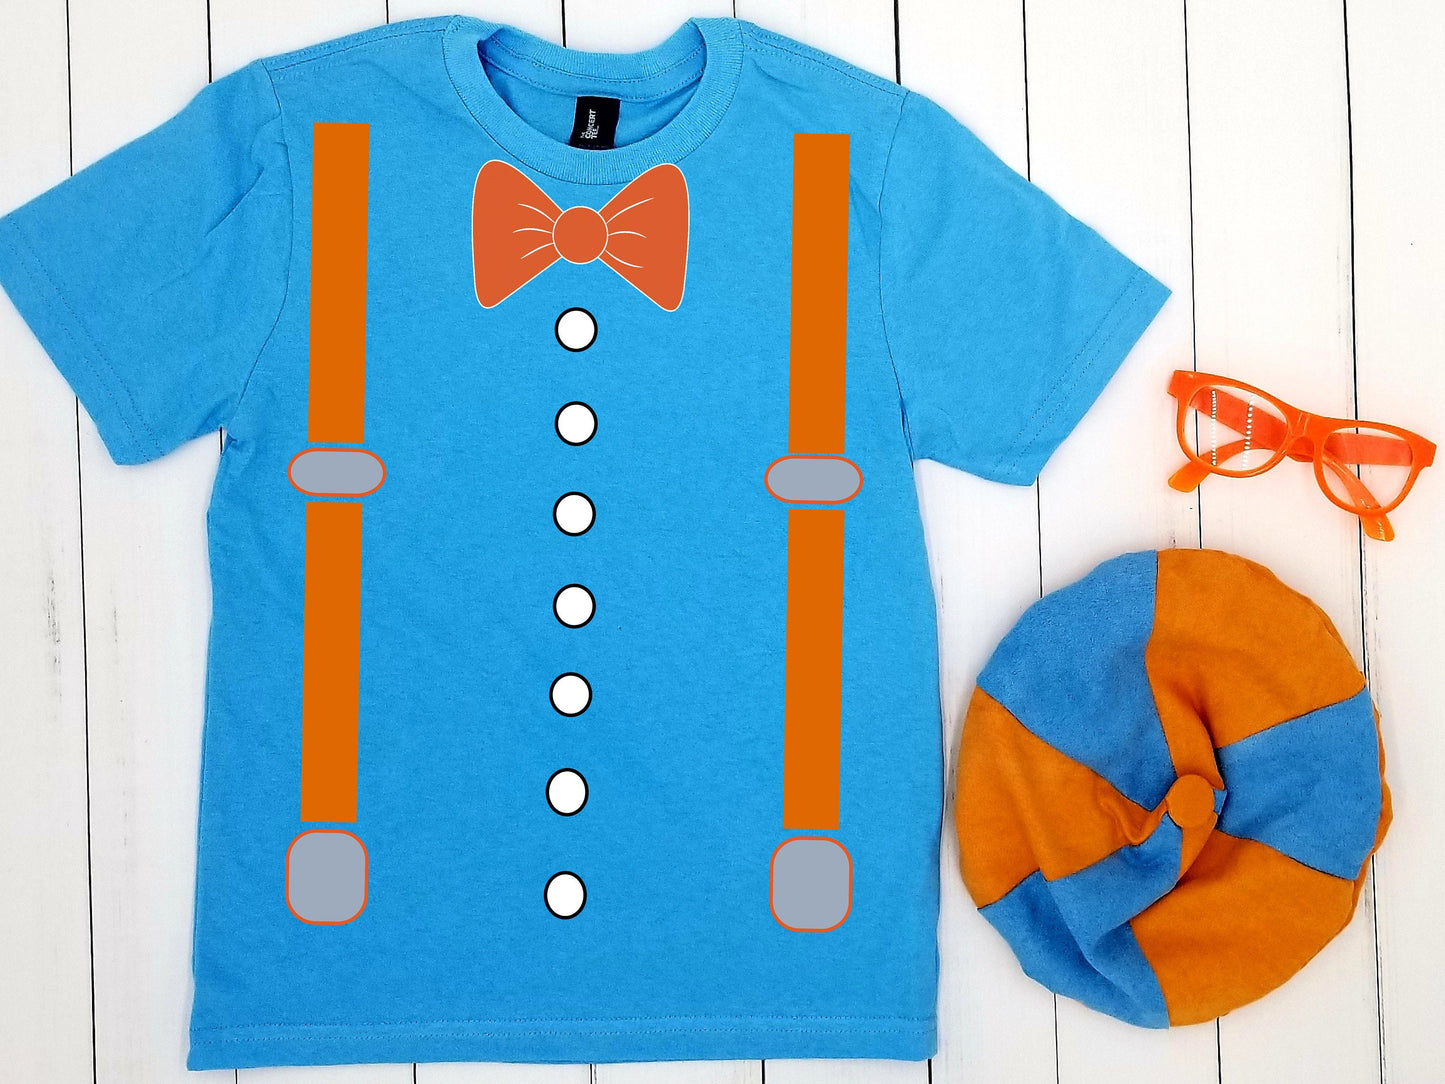 CHILD BLIPPI 3 Piece Costume Set | BLIPPI Tshirt with Bow Tie and Suspenders, Glasses and Matching Hat | Blippi Halloween Costume